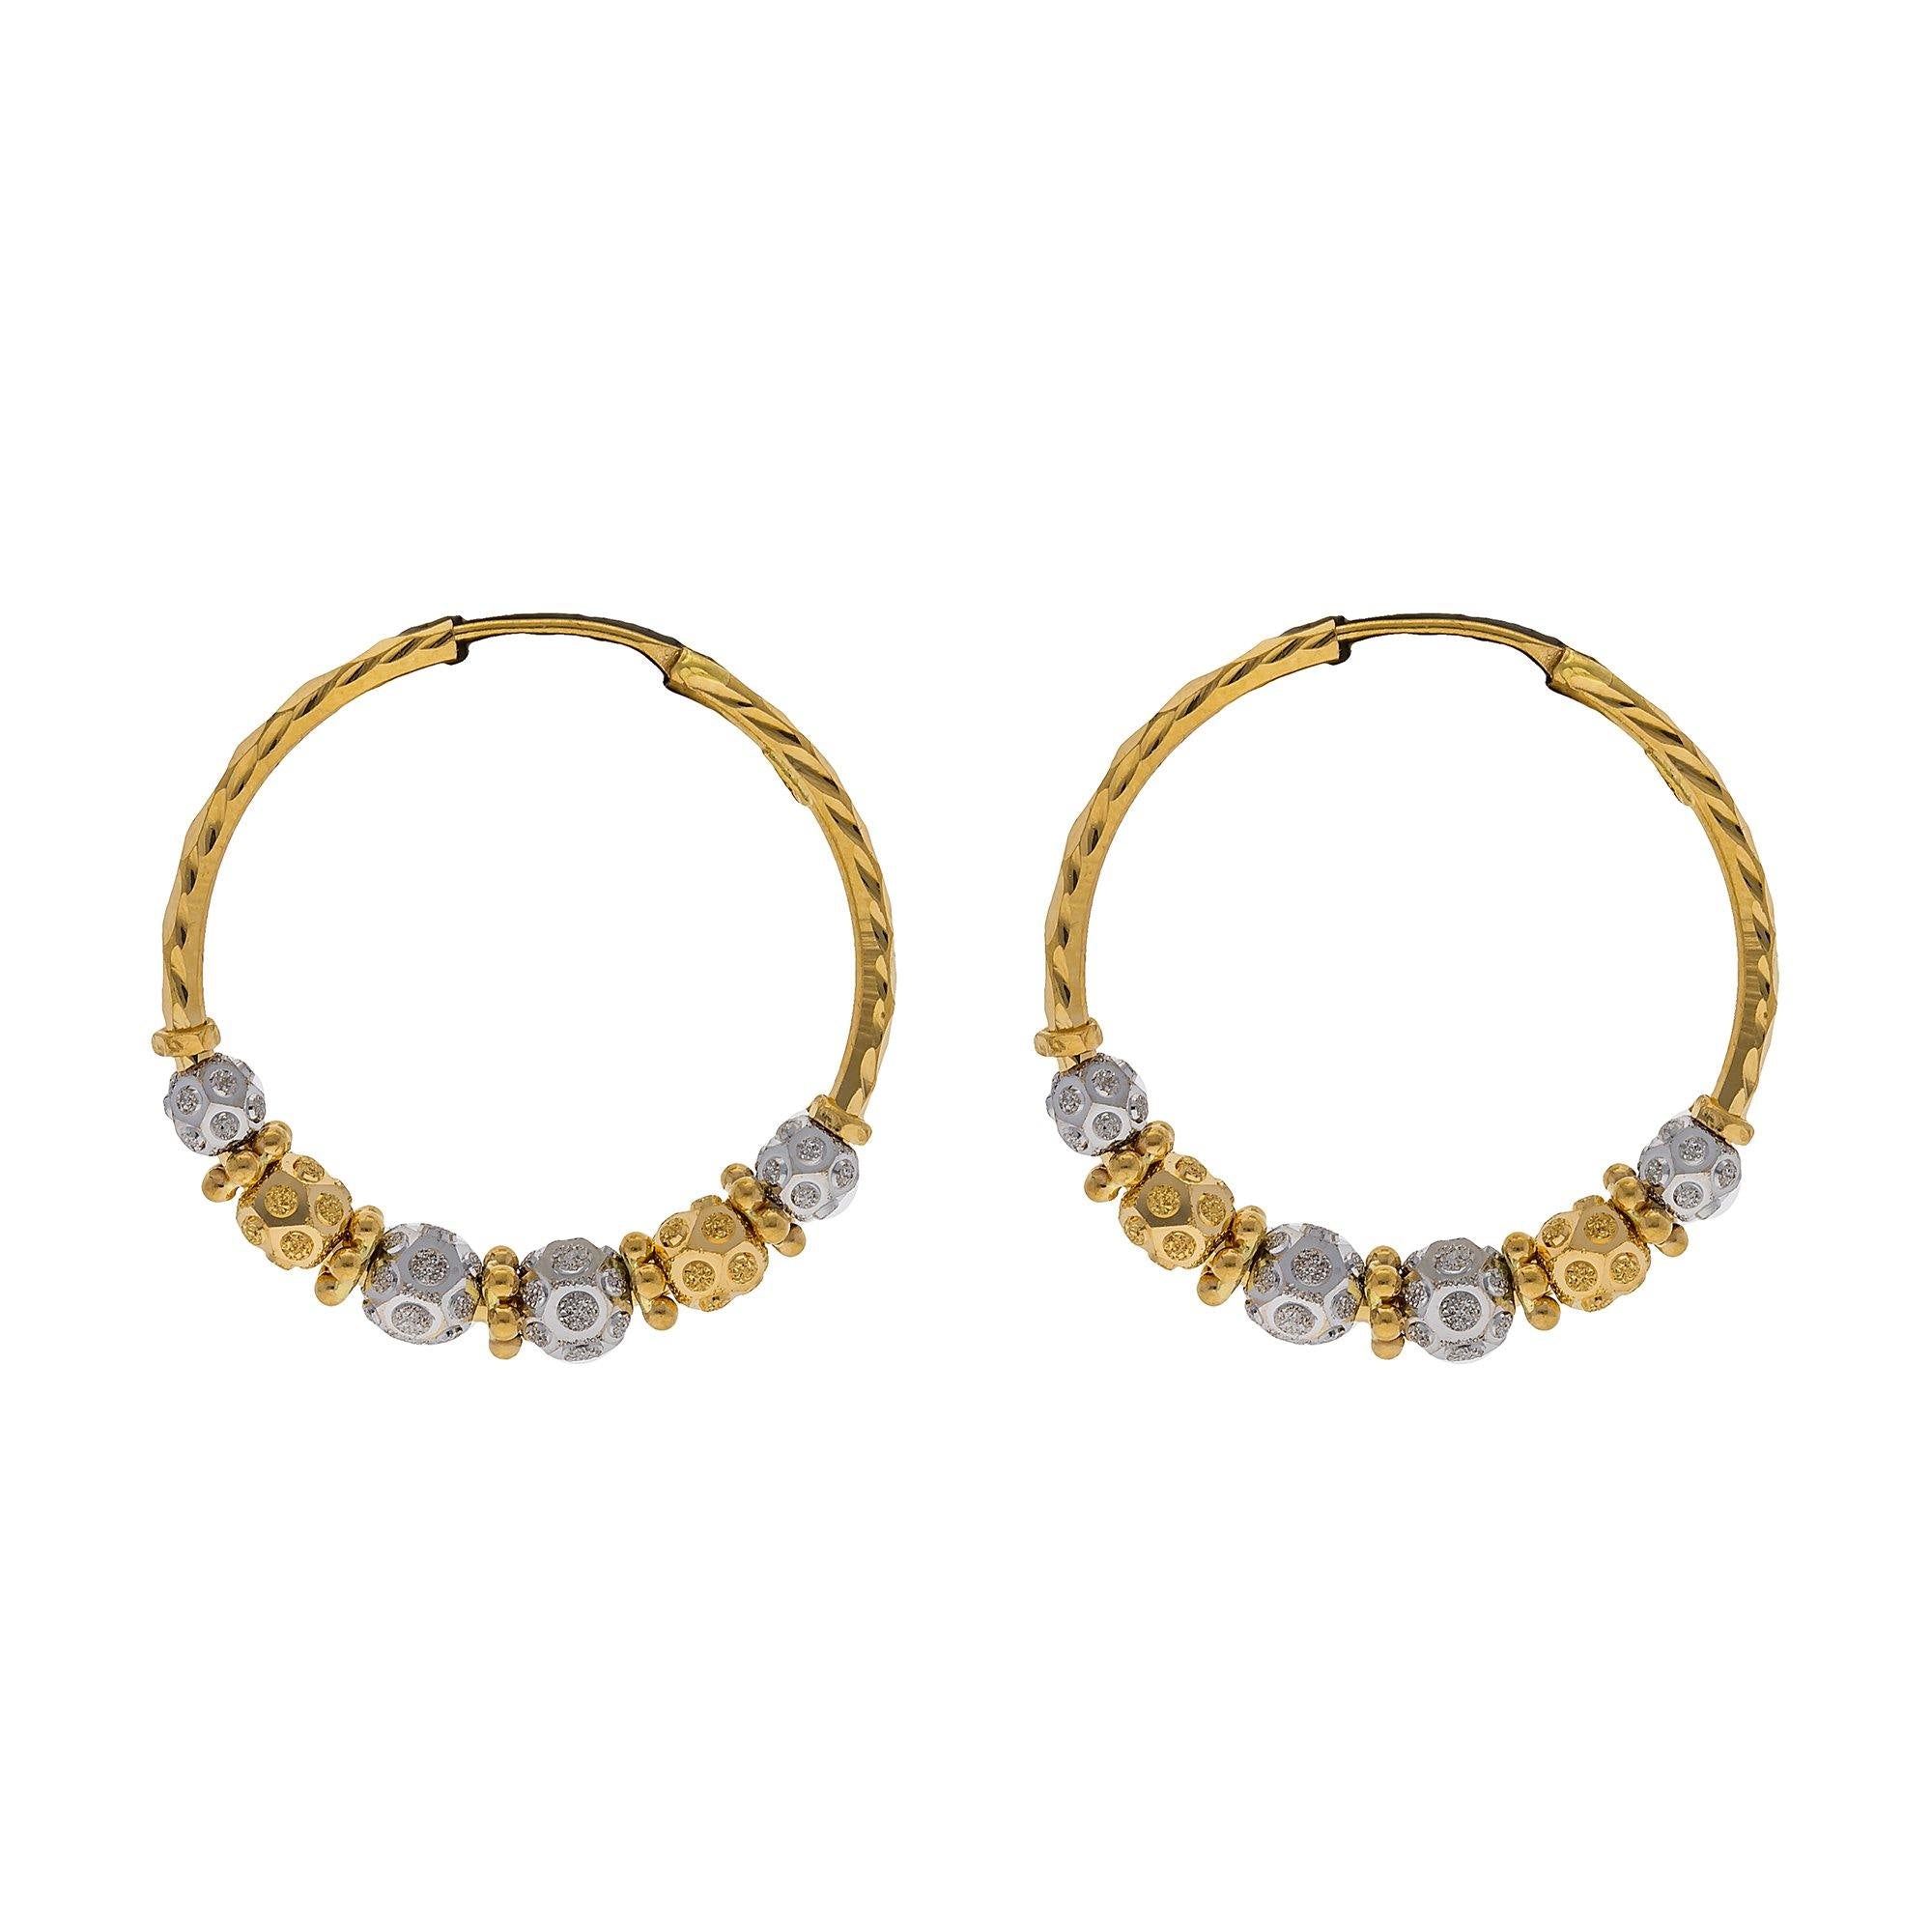 Discover more than 218 beads earrings gold super hot